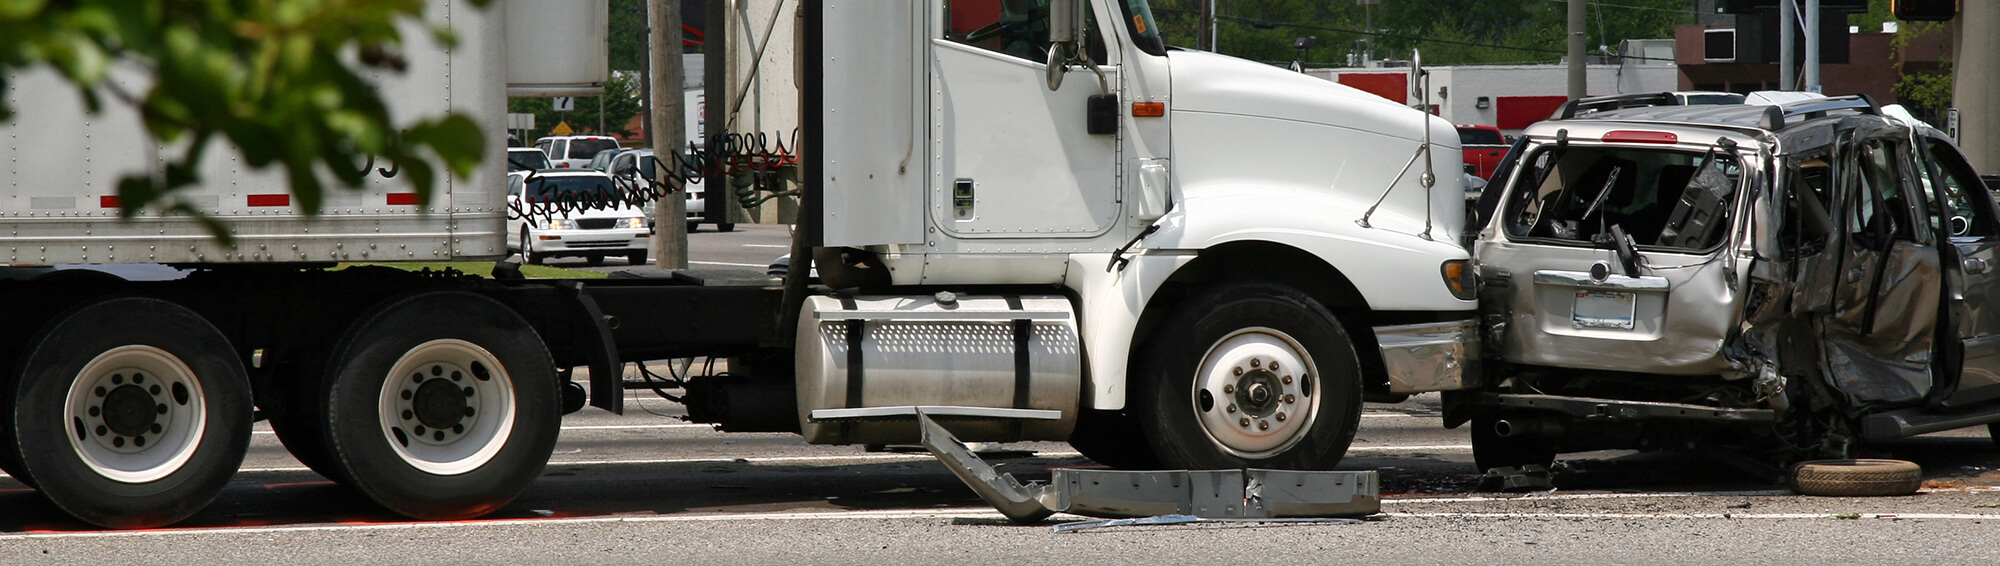 Nashville Truck Accident Lawyers Discuss Dangers of Intersections